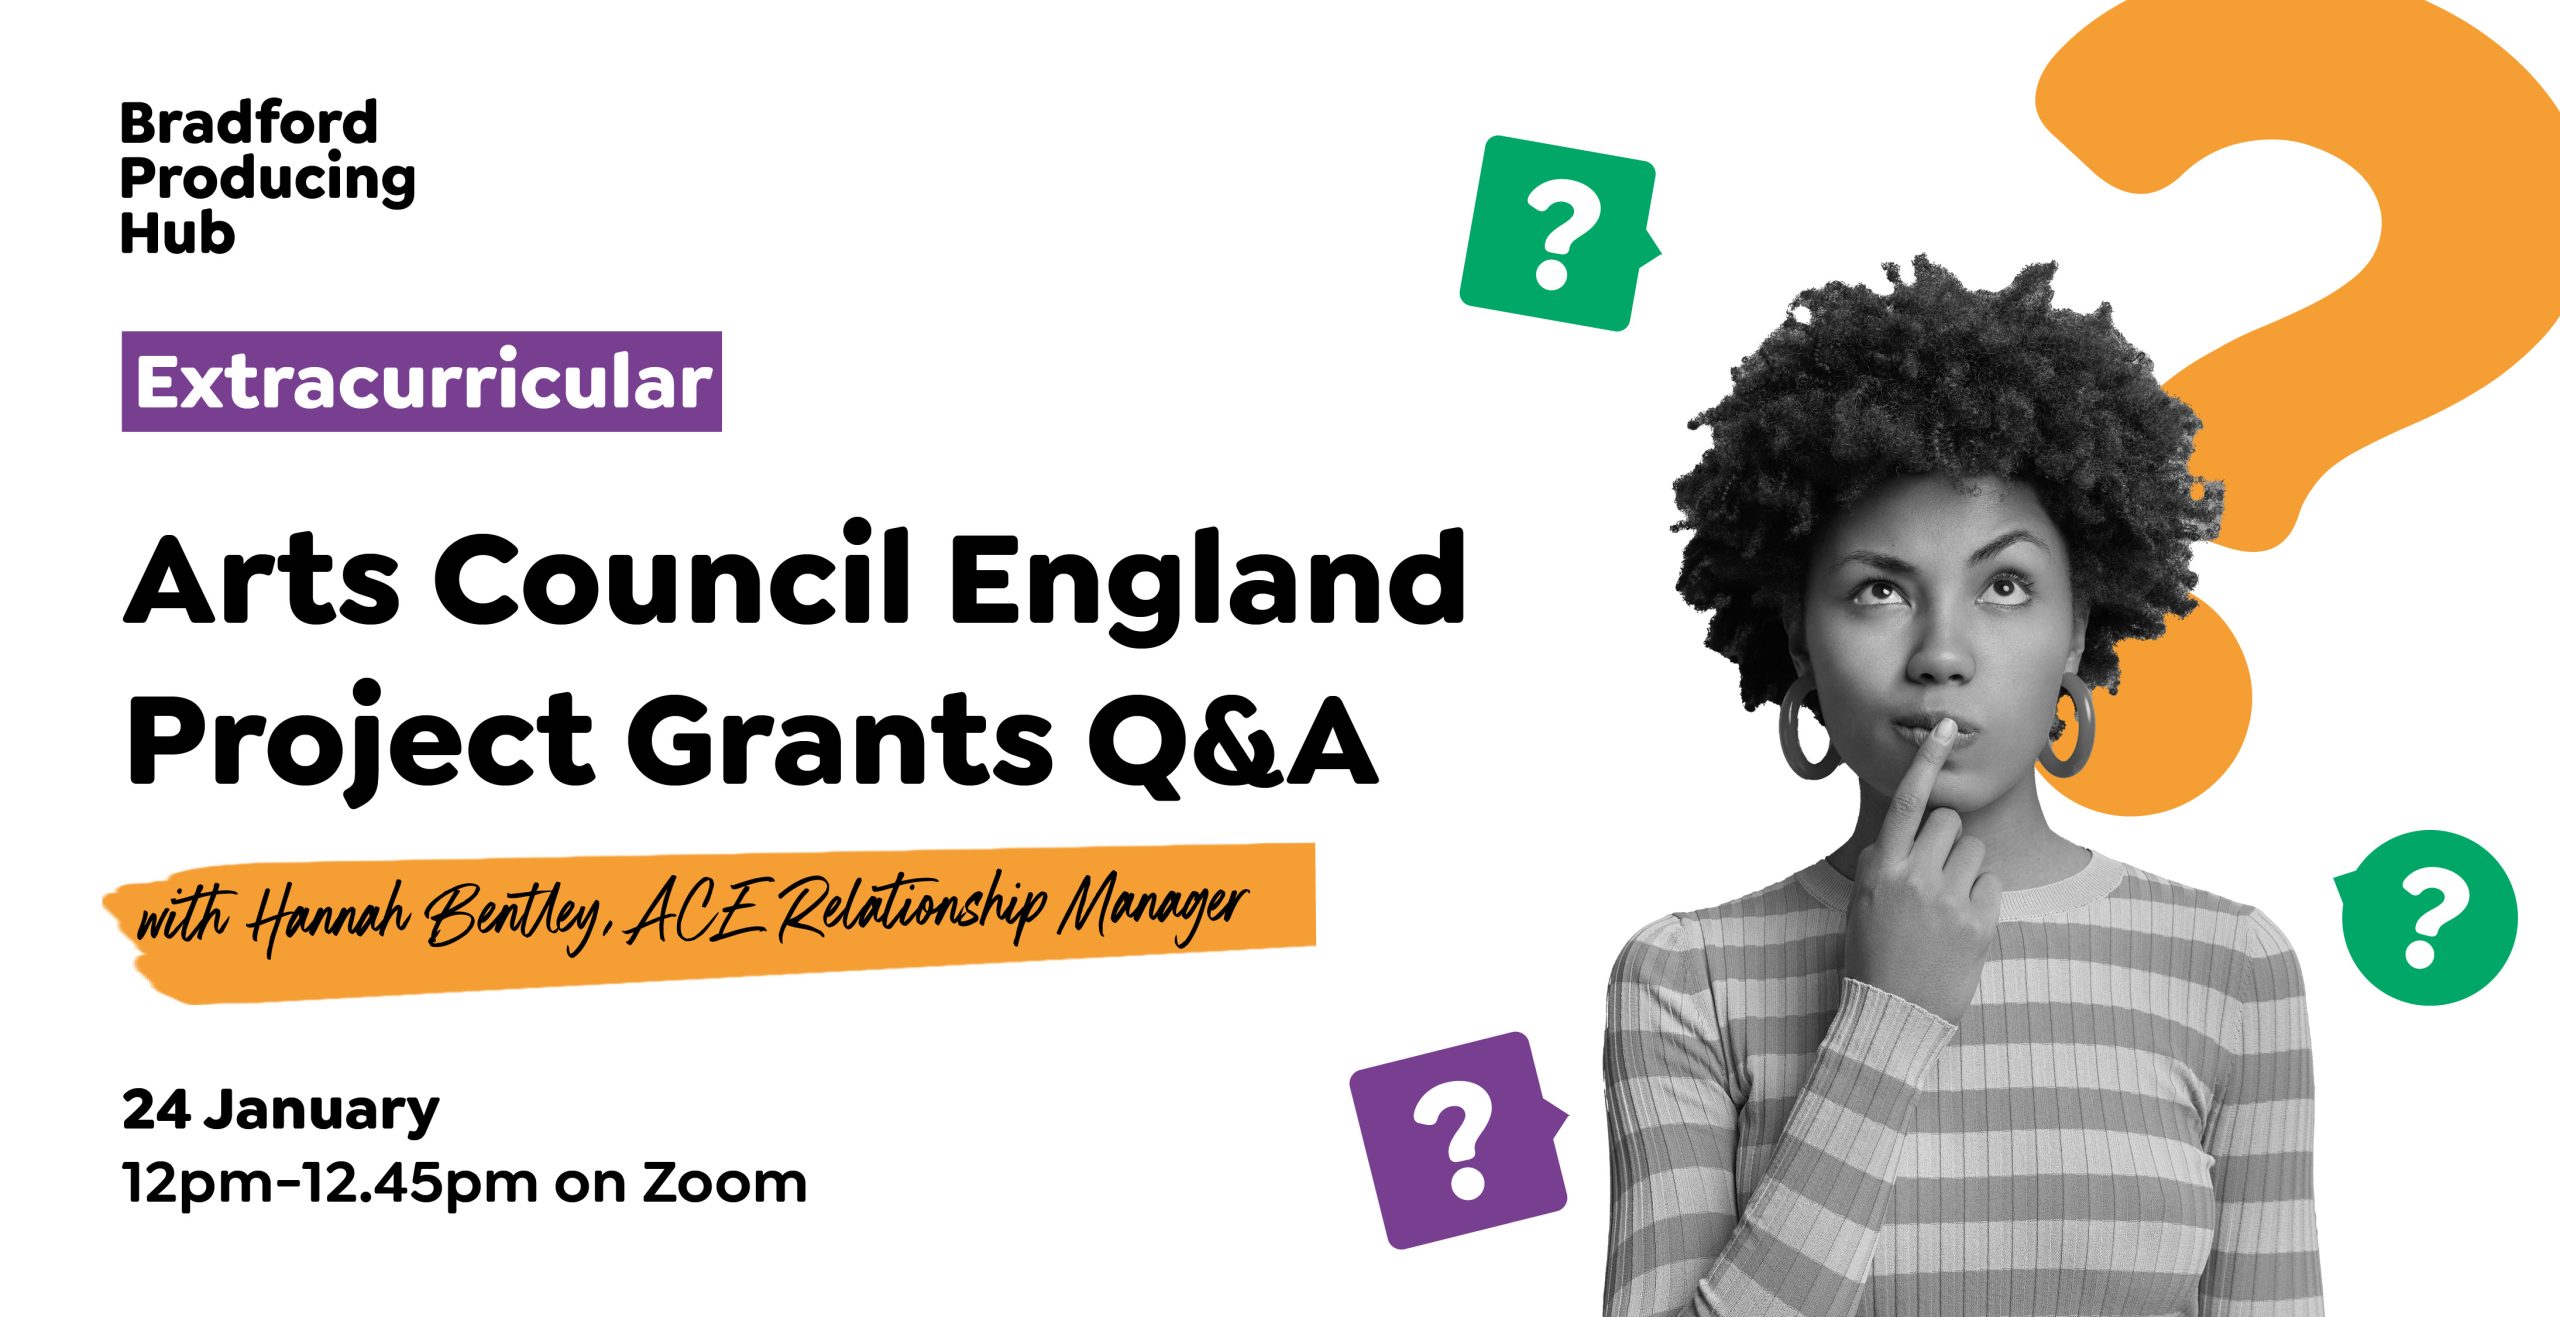 Extracurricular Arts Council England Project Grants Q&A